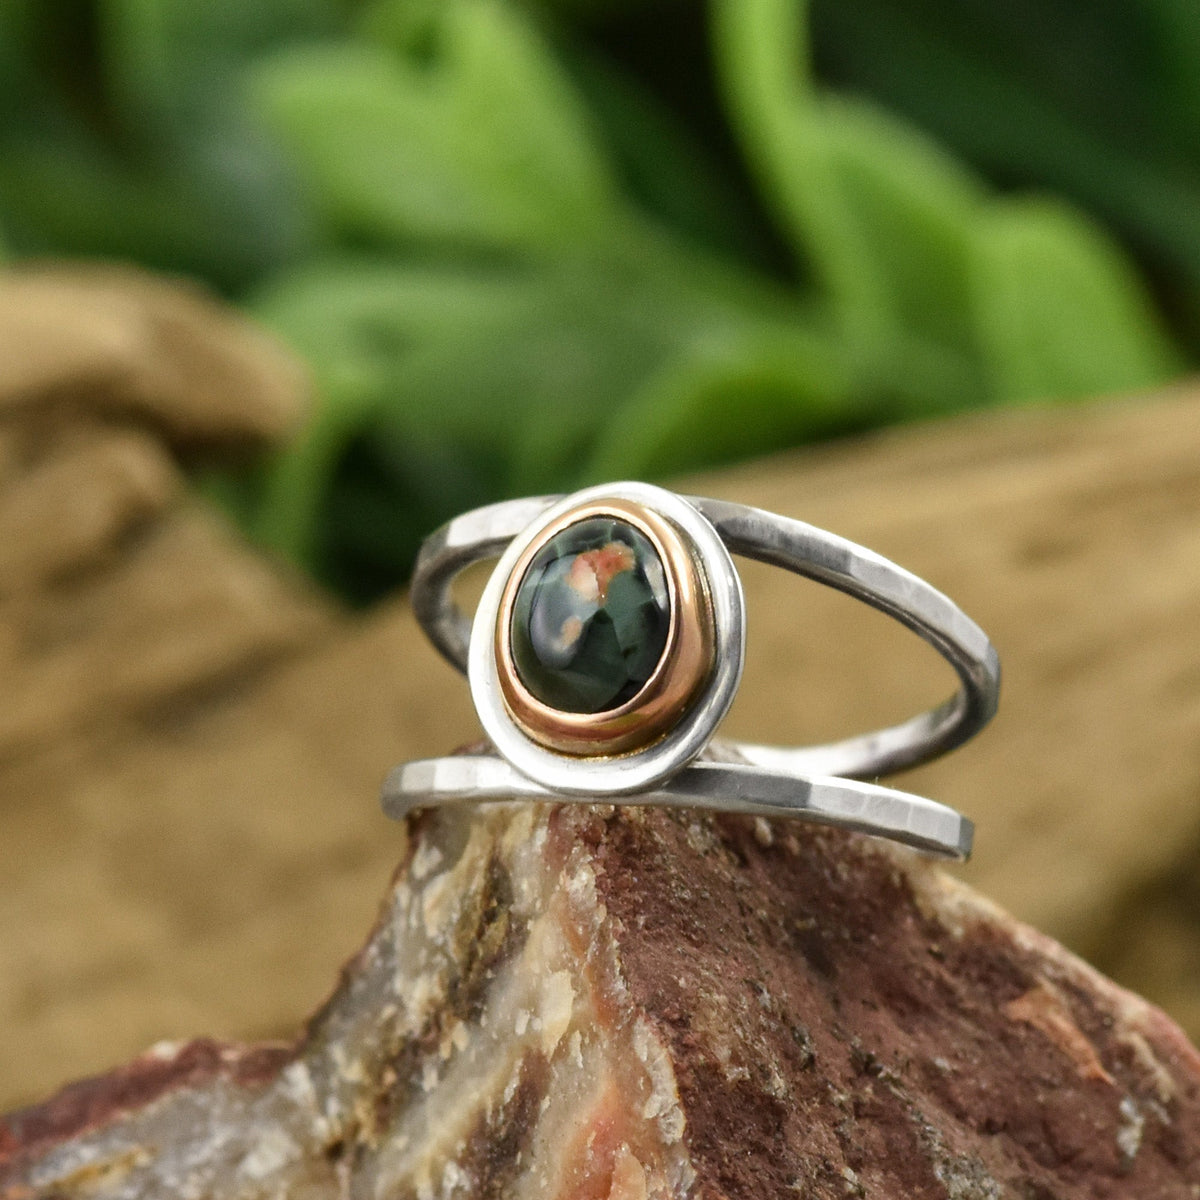 Rose Gold Michigan Greenstone Ring - Choose Your Own Stone - Ring A. 7.5 x 5.5mm / Greenstone B. 7.5 x 5.5mm / Greenstone 7115 - handmade by Beth Millner Jewelry